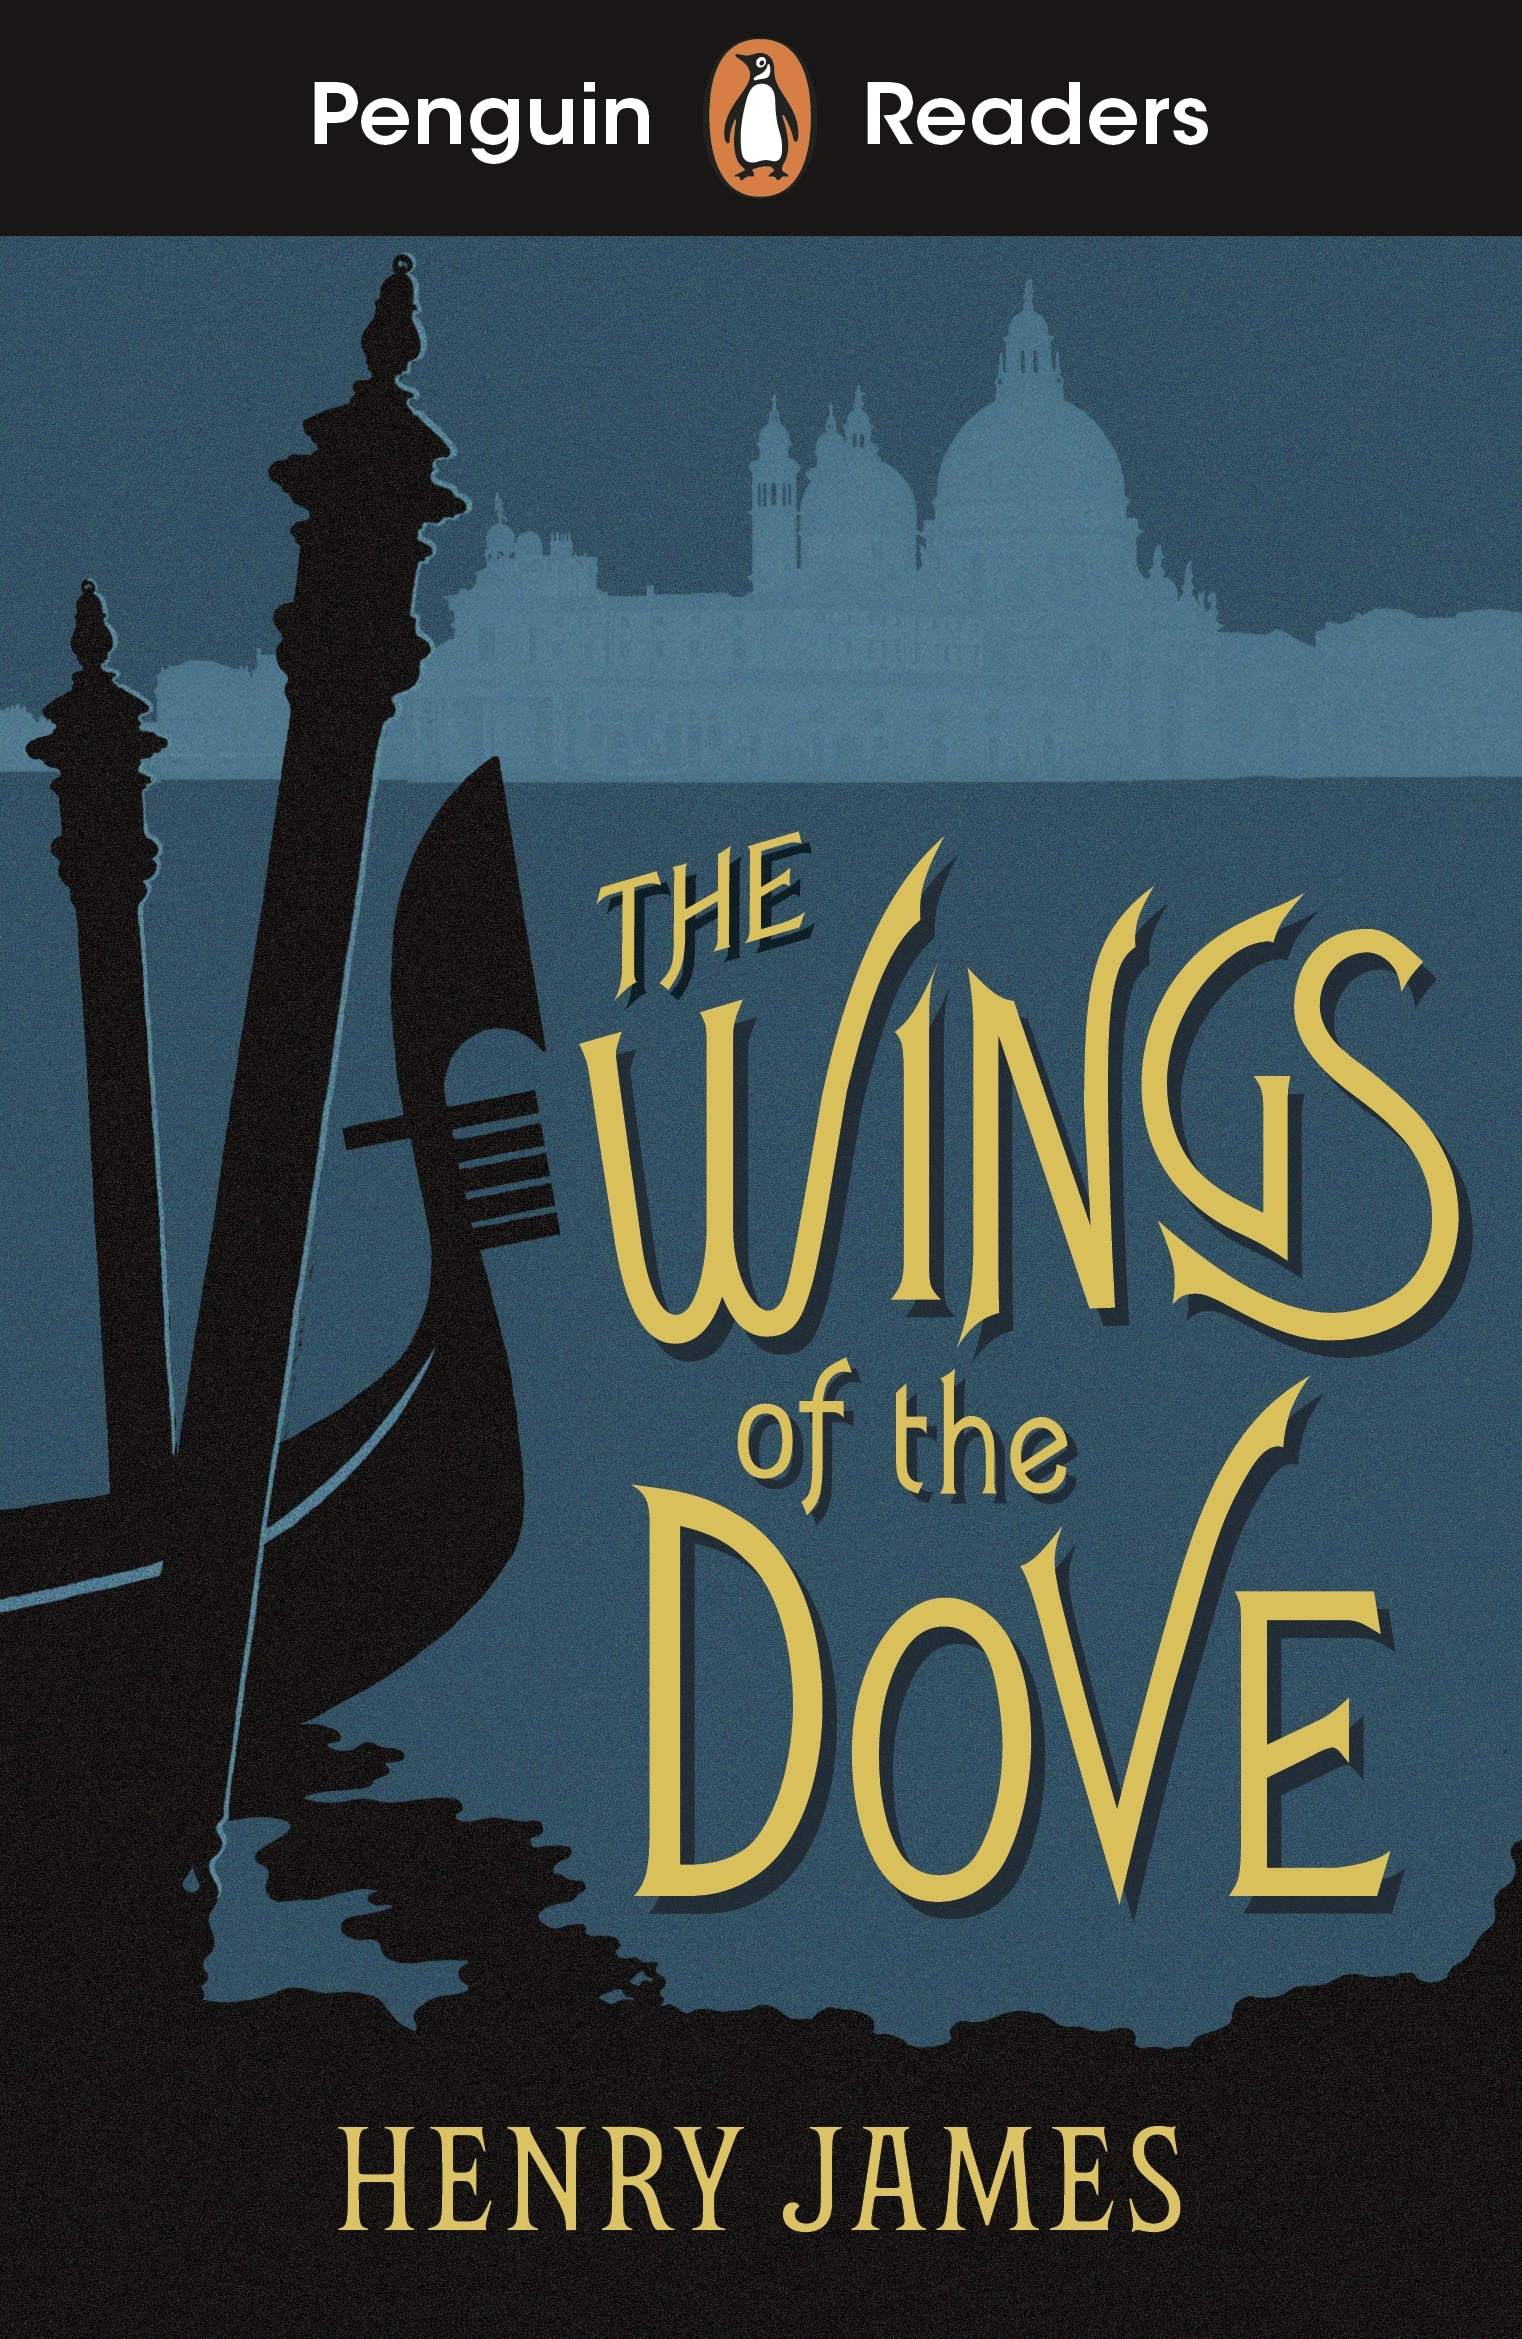 Book “Penguin Readers Level 5: The Wings of the Dove (ELT Graded Reader)” by Henry James — February 2, 2023